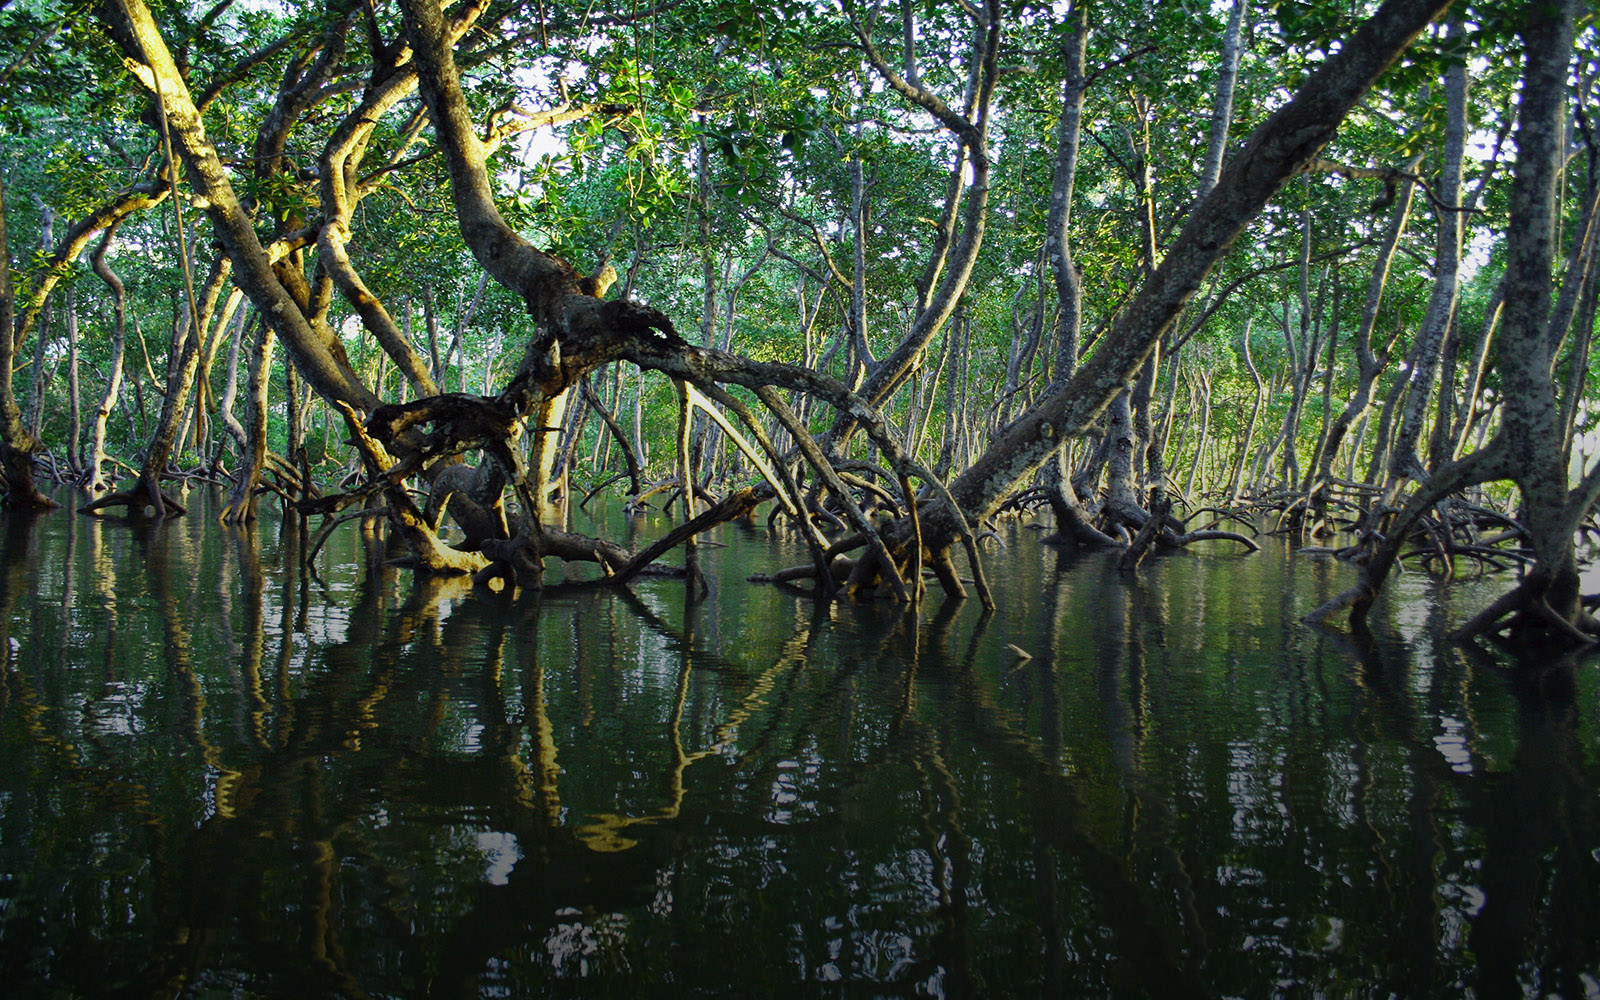 Mangrove forests are exceptionally carbon rich, biodiverse habitats